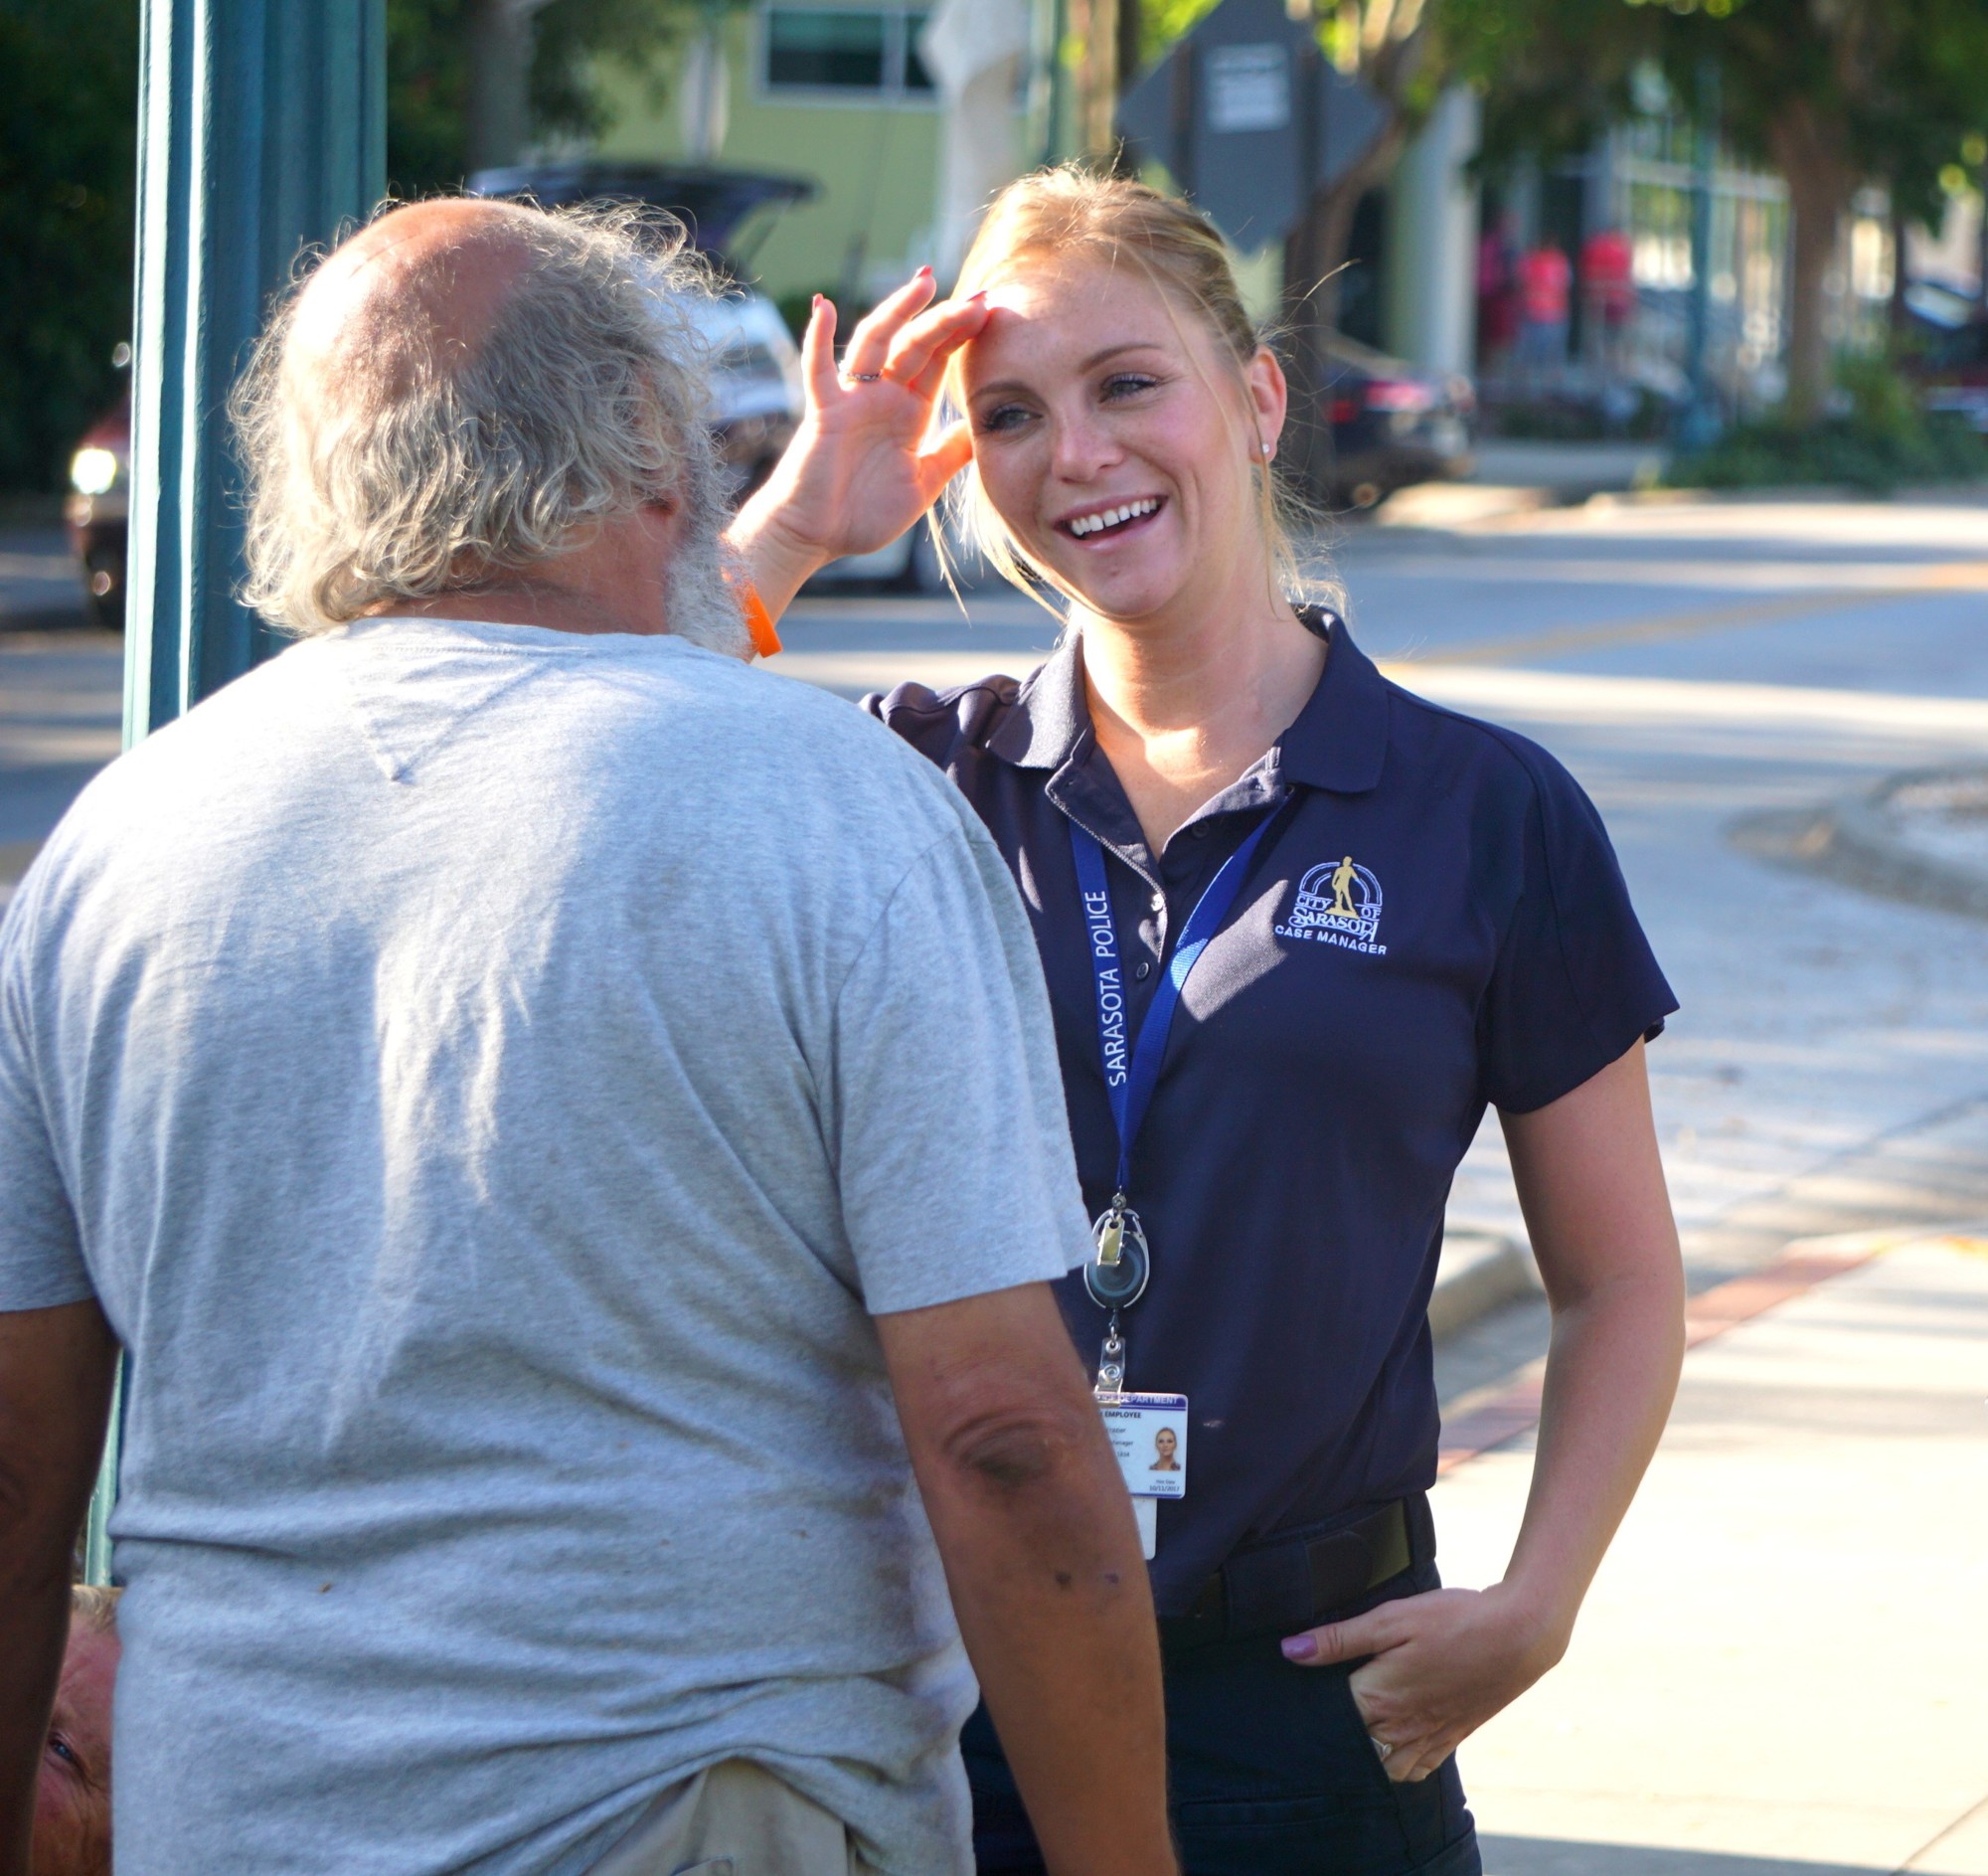 Krystal Frazier, a case manager with the city's homeless outreach team, said COVID-19 has brought stakeholders working on homelessness in the region closer together. Photo courtesy city of Sarasota.